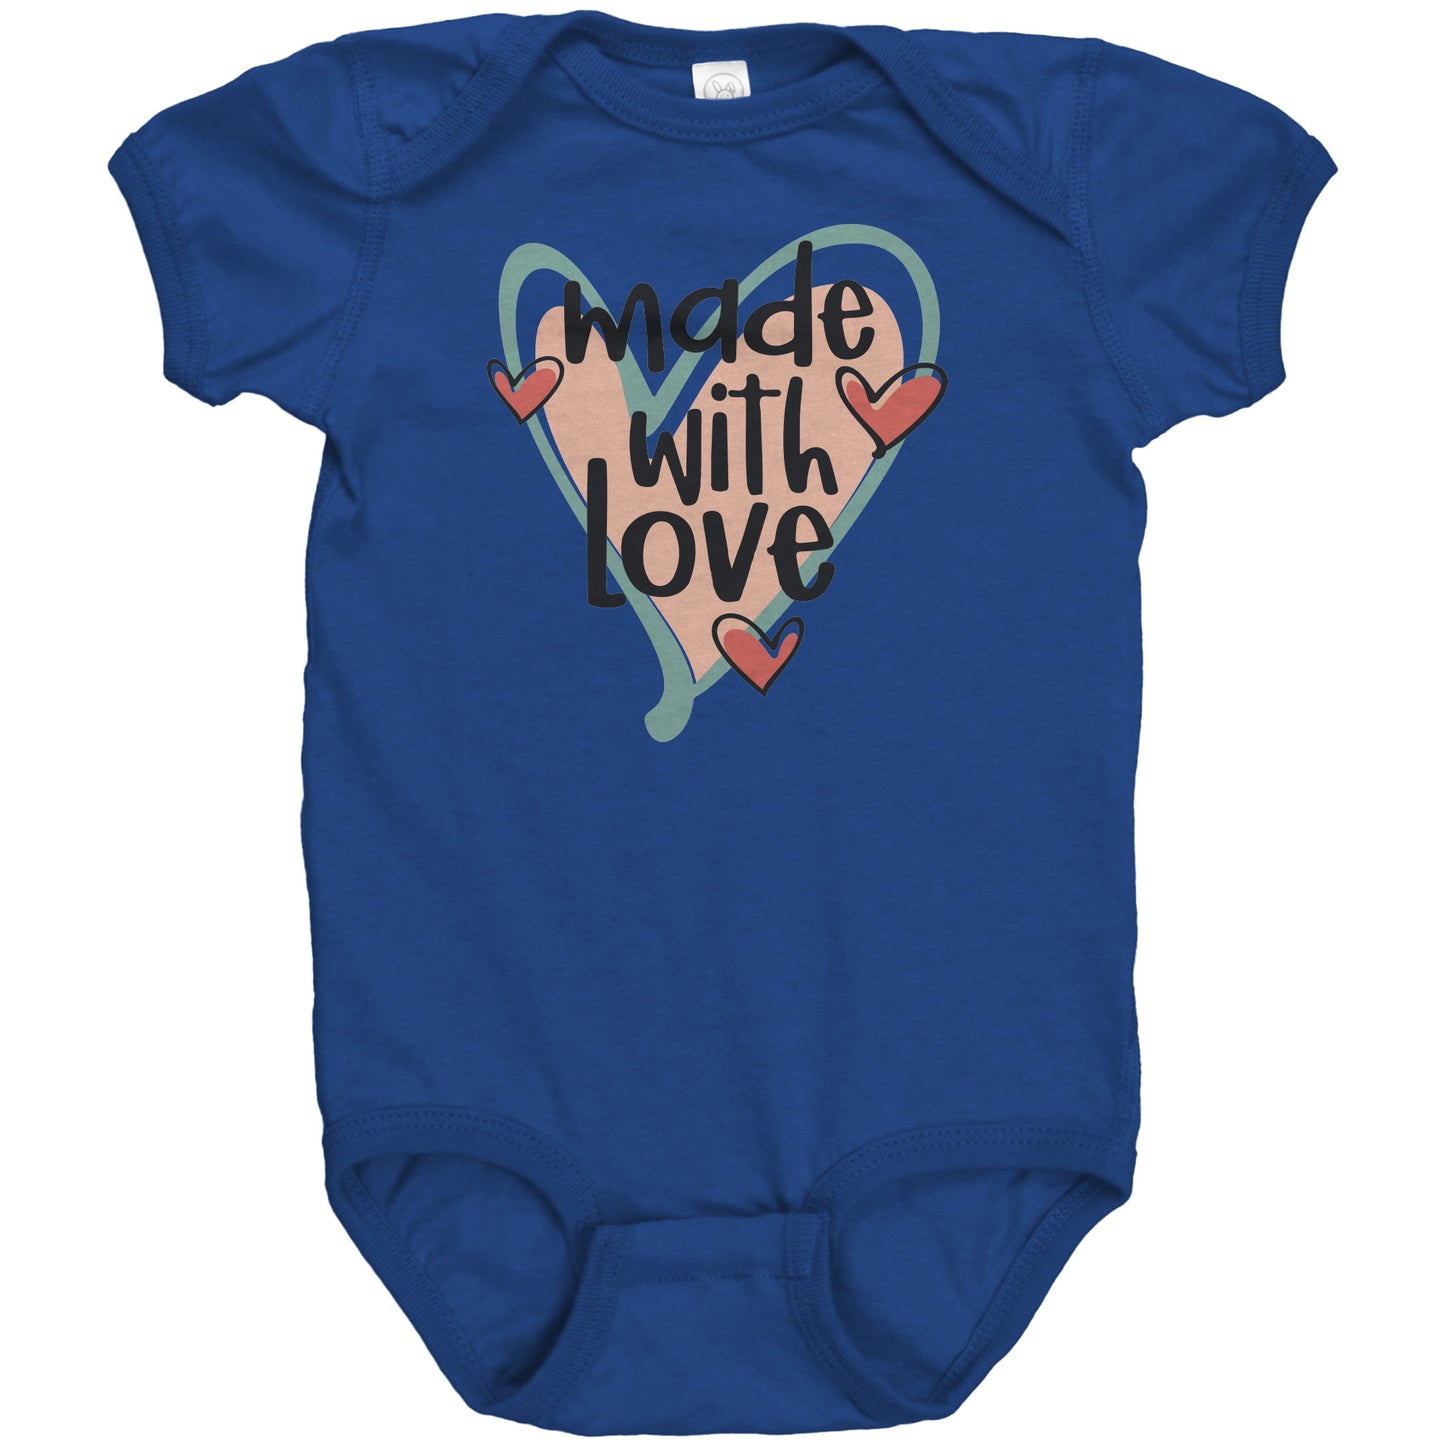 Made With Love - Infant Bodysuits